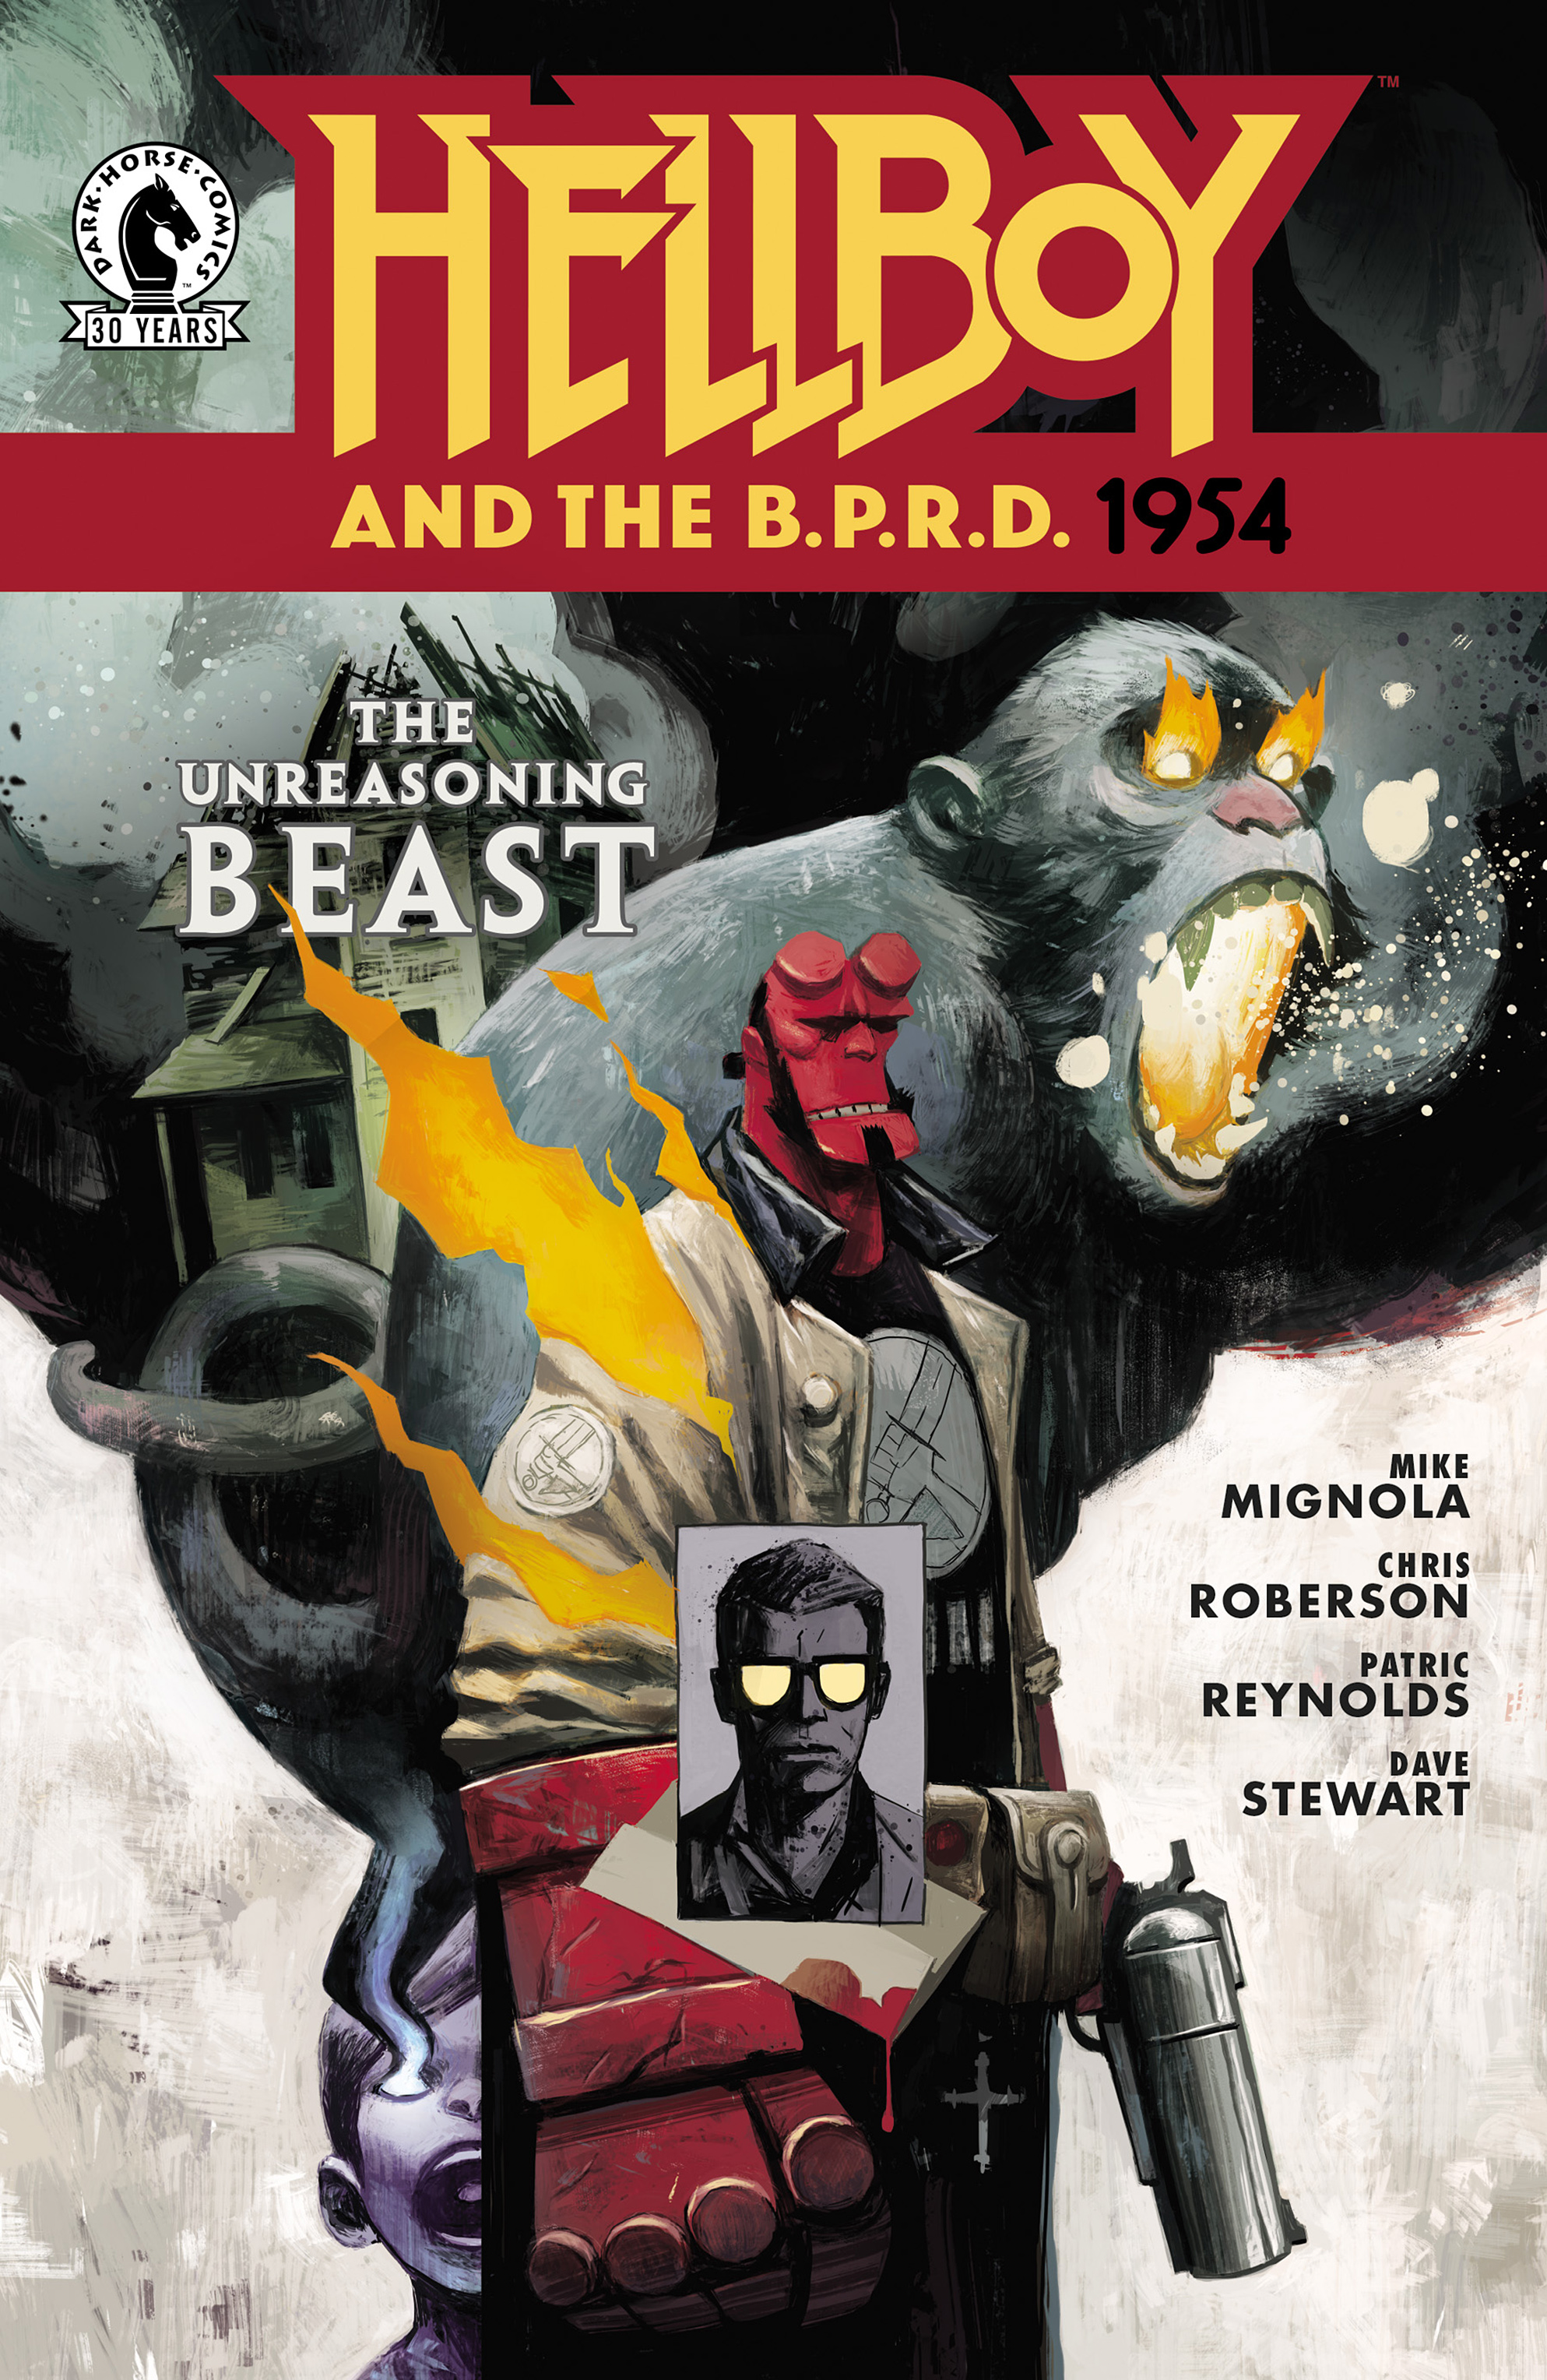 Read online Hellboy and the B.P.R.D.: 1954--The Unreasoning Beast comic -  Issue # Full - 1